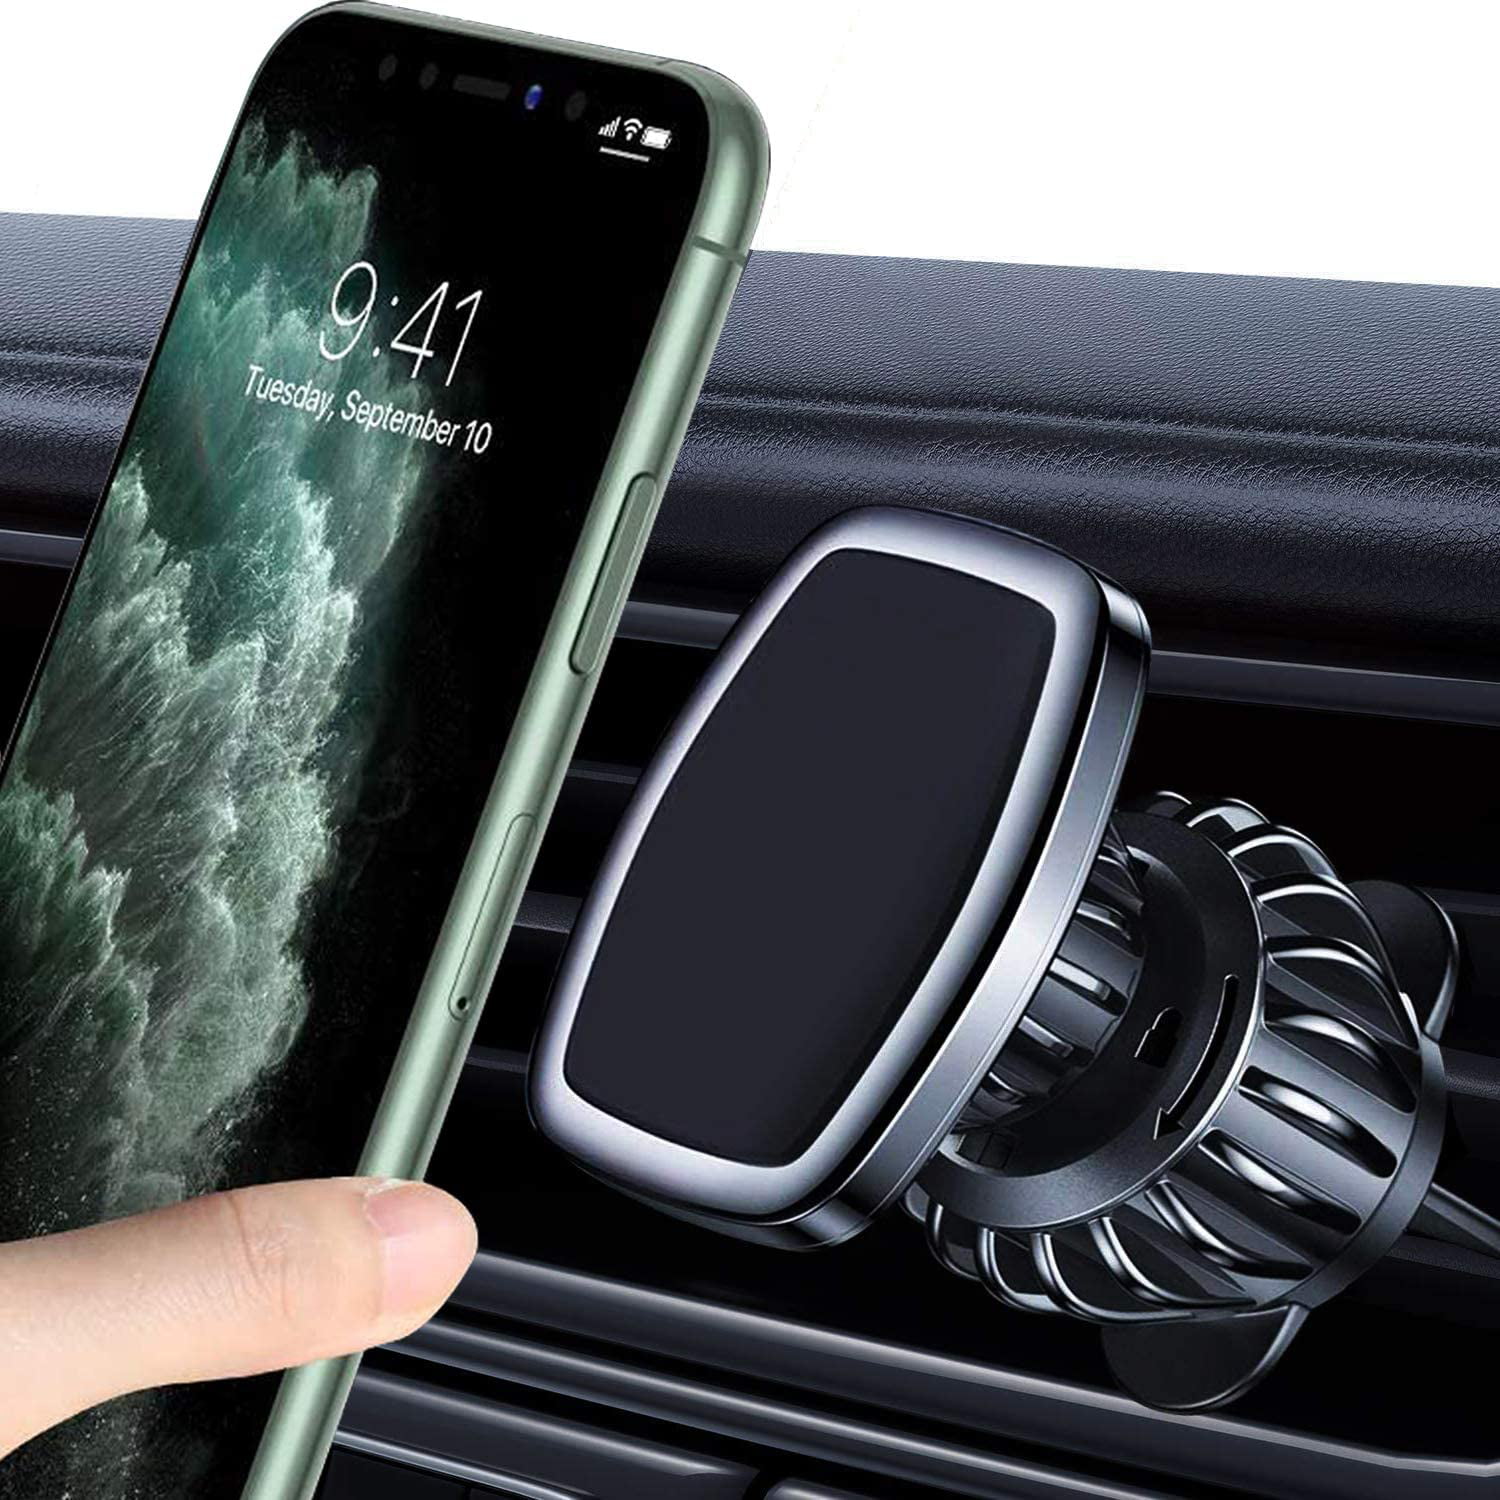 - Vent Black Blue Hands-Free Phone Car Vent Mount Compatible with iPhone XR/Xs/Max/Xs/X/8/7/6 Plus SJY Car Phone Holder Samsung S10+/S10/S9/S8/LG/Google and etc